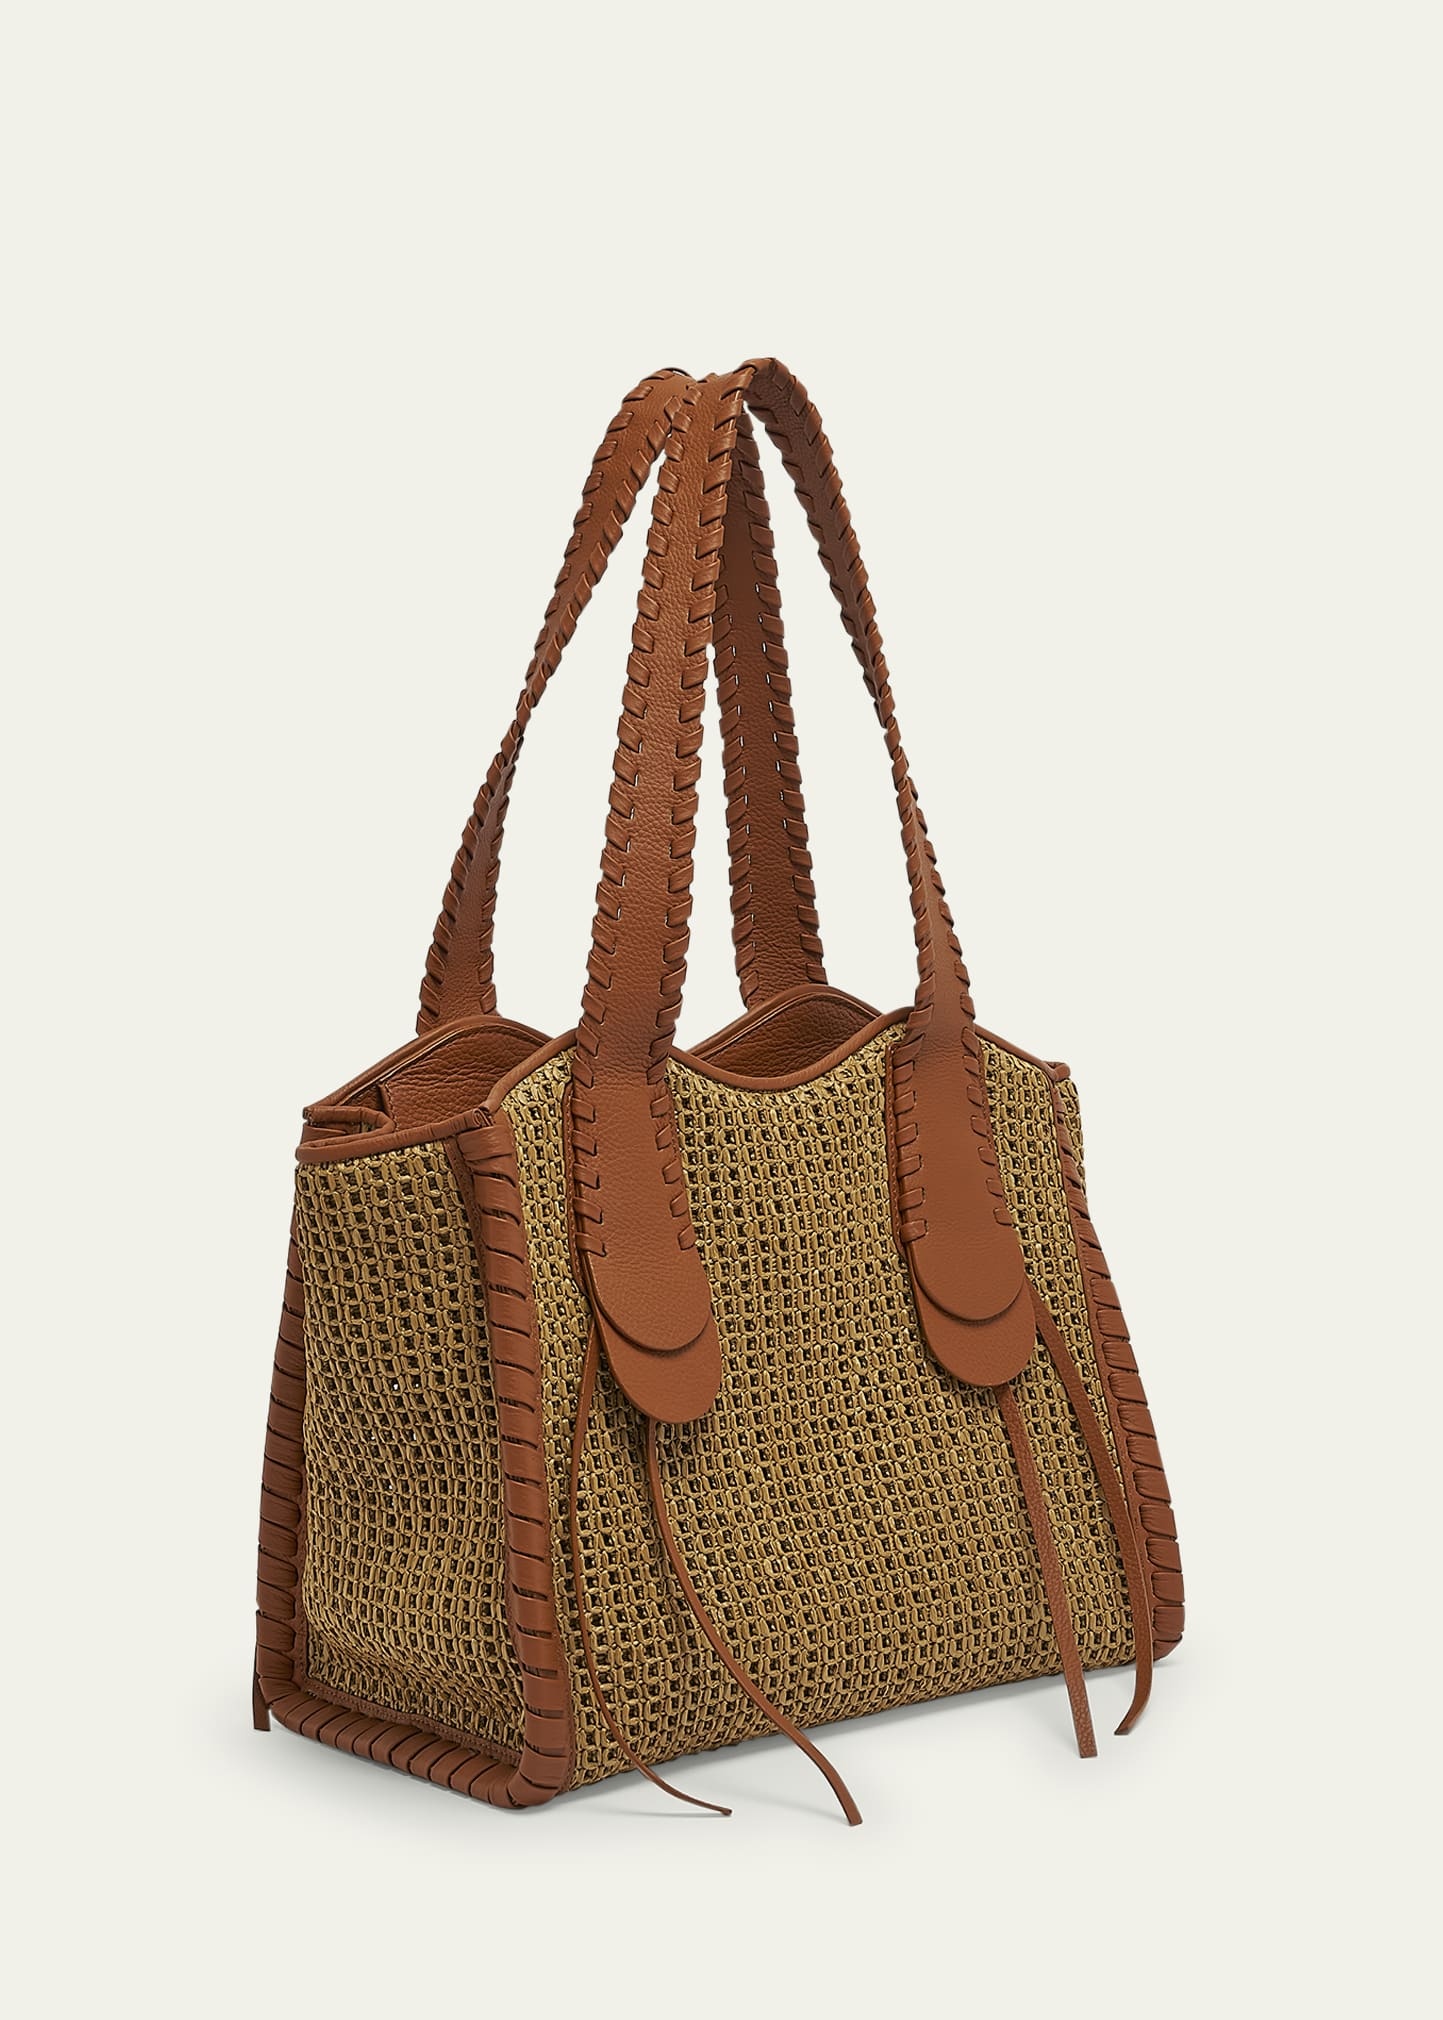 Monty Tote Bag in Raffia and Calfskin Leather - 3